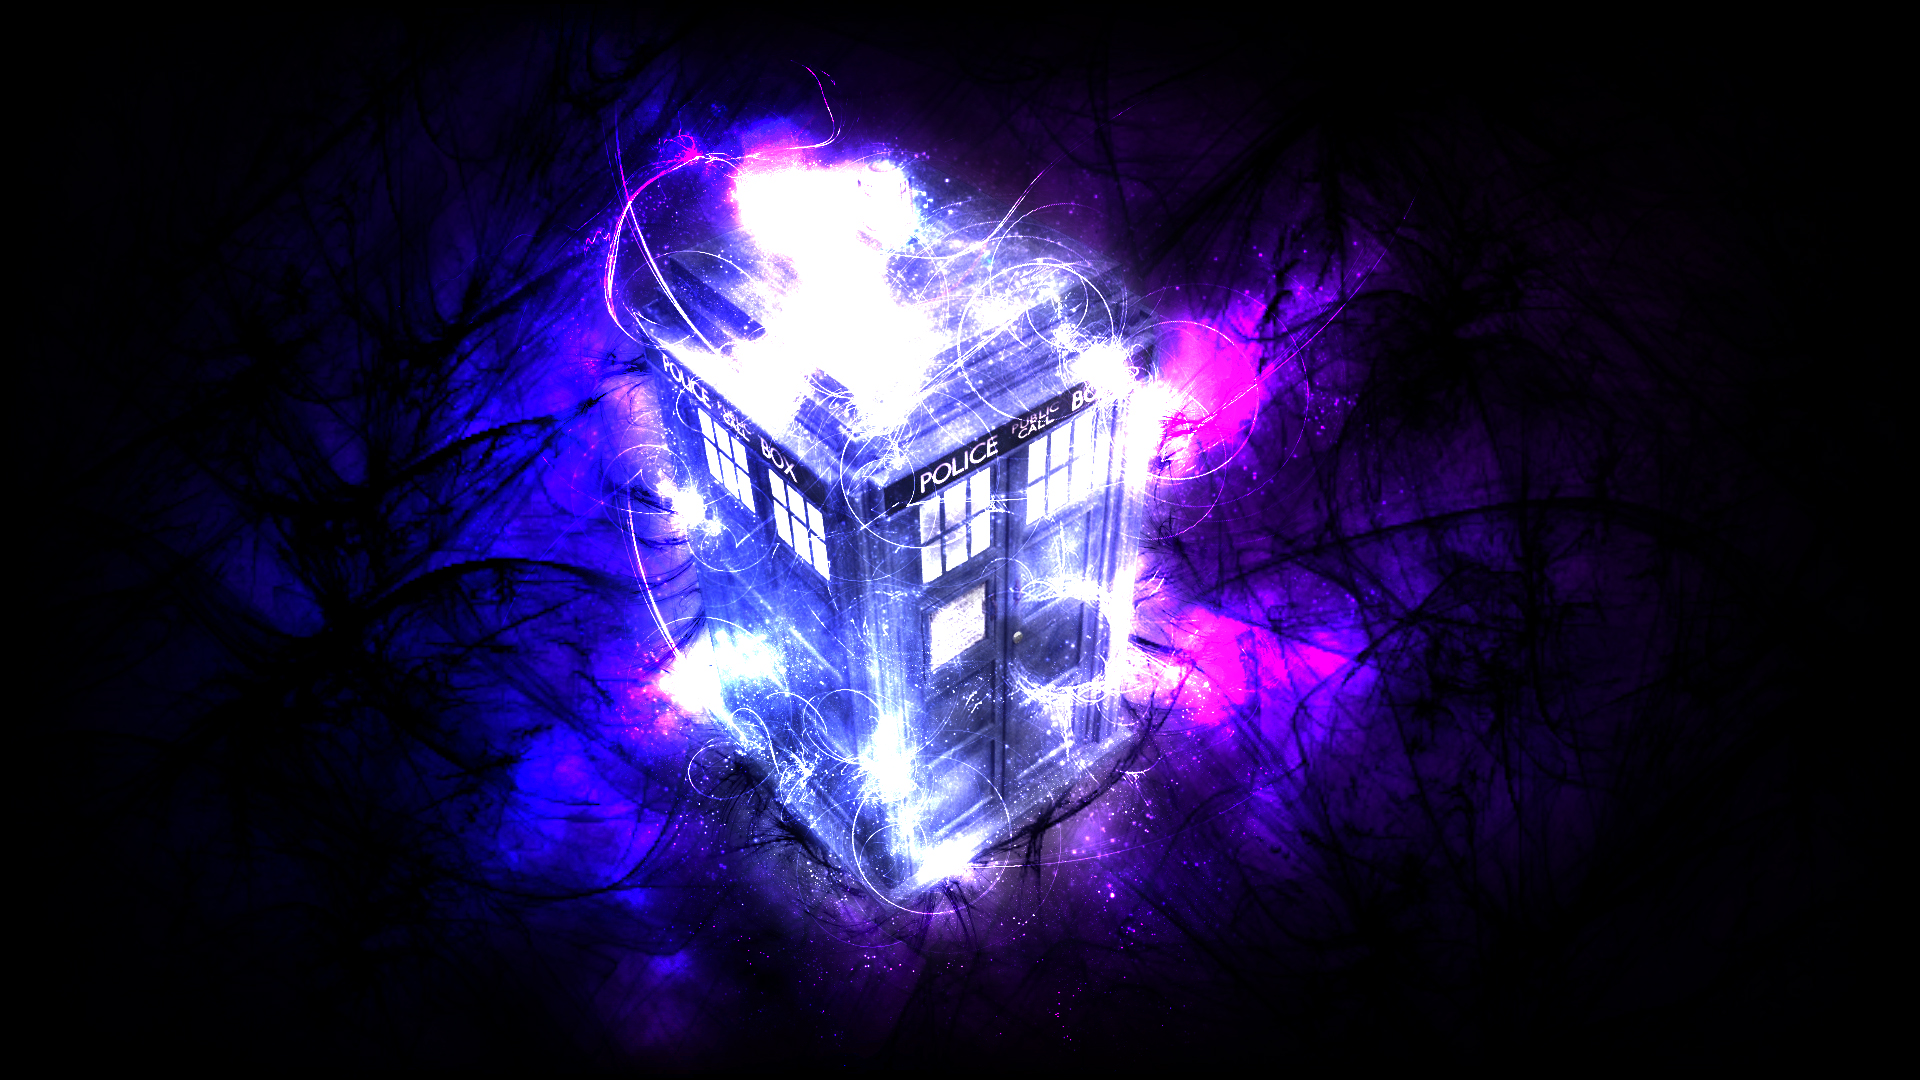 Dr Who Wallpaper And Photos In High